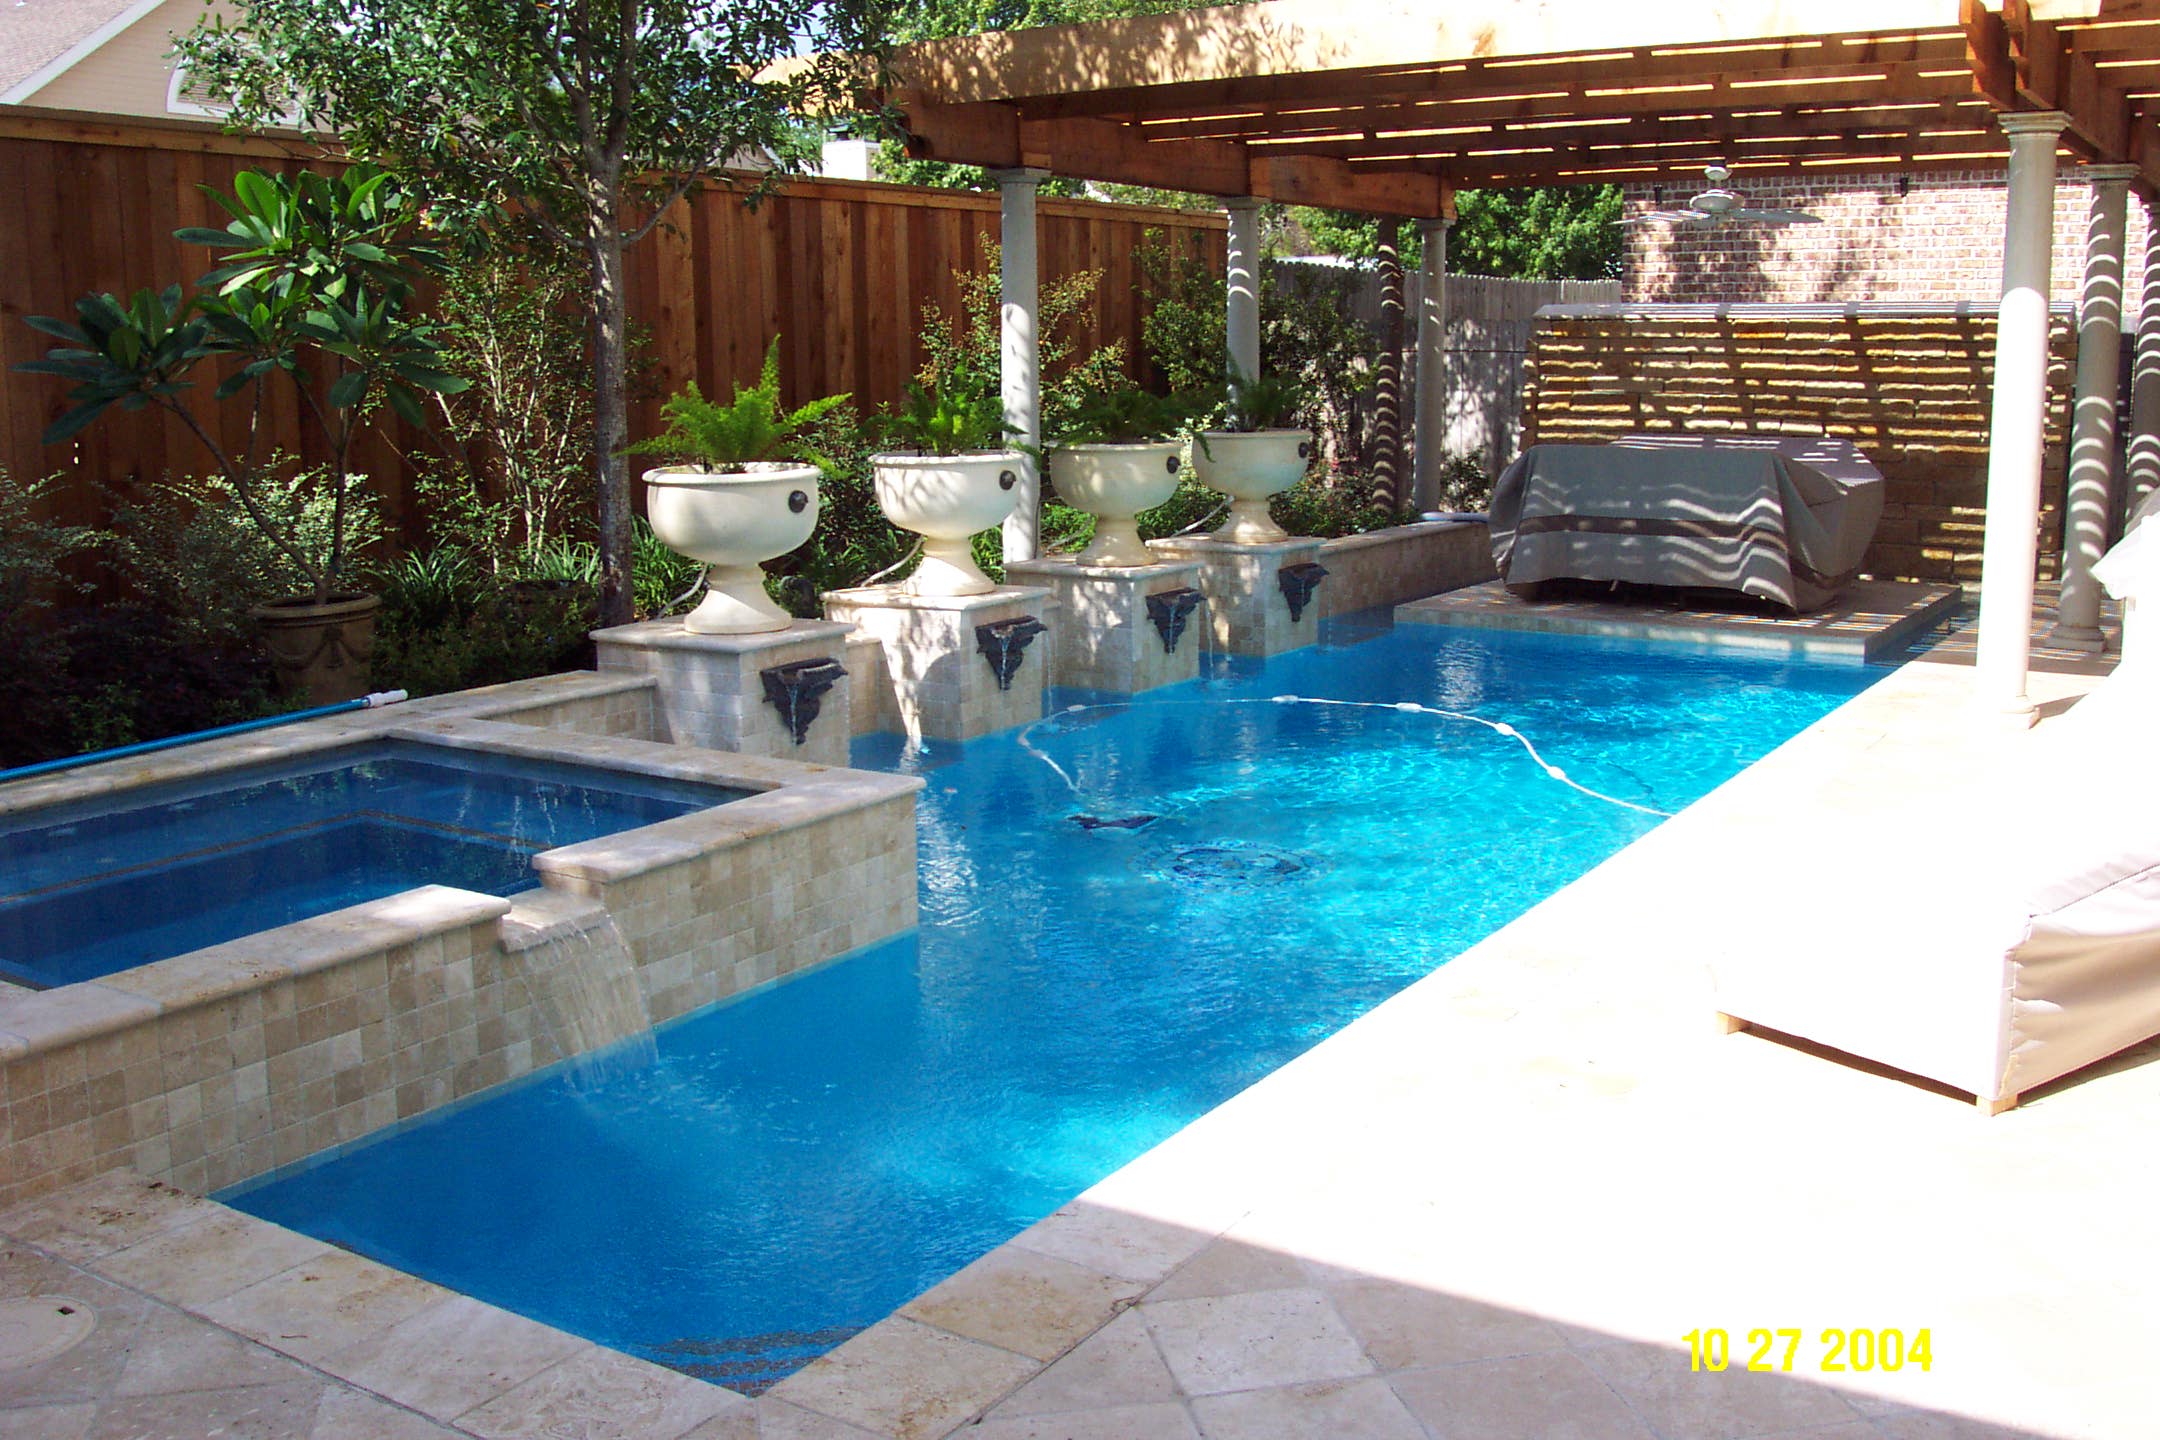 Awesome Small Swimming Pools Designs to Refresh Backyard Area | Ideas 4